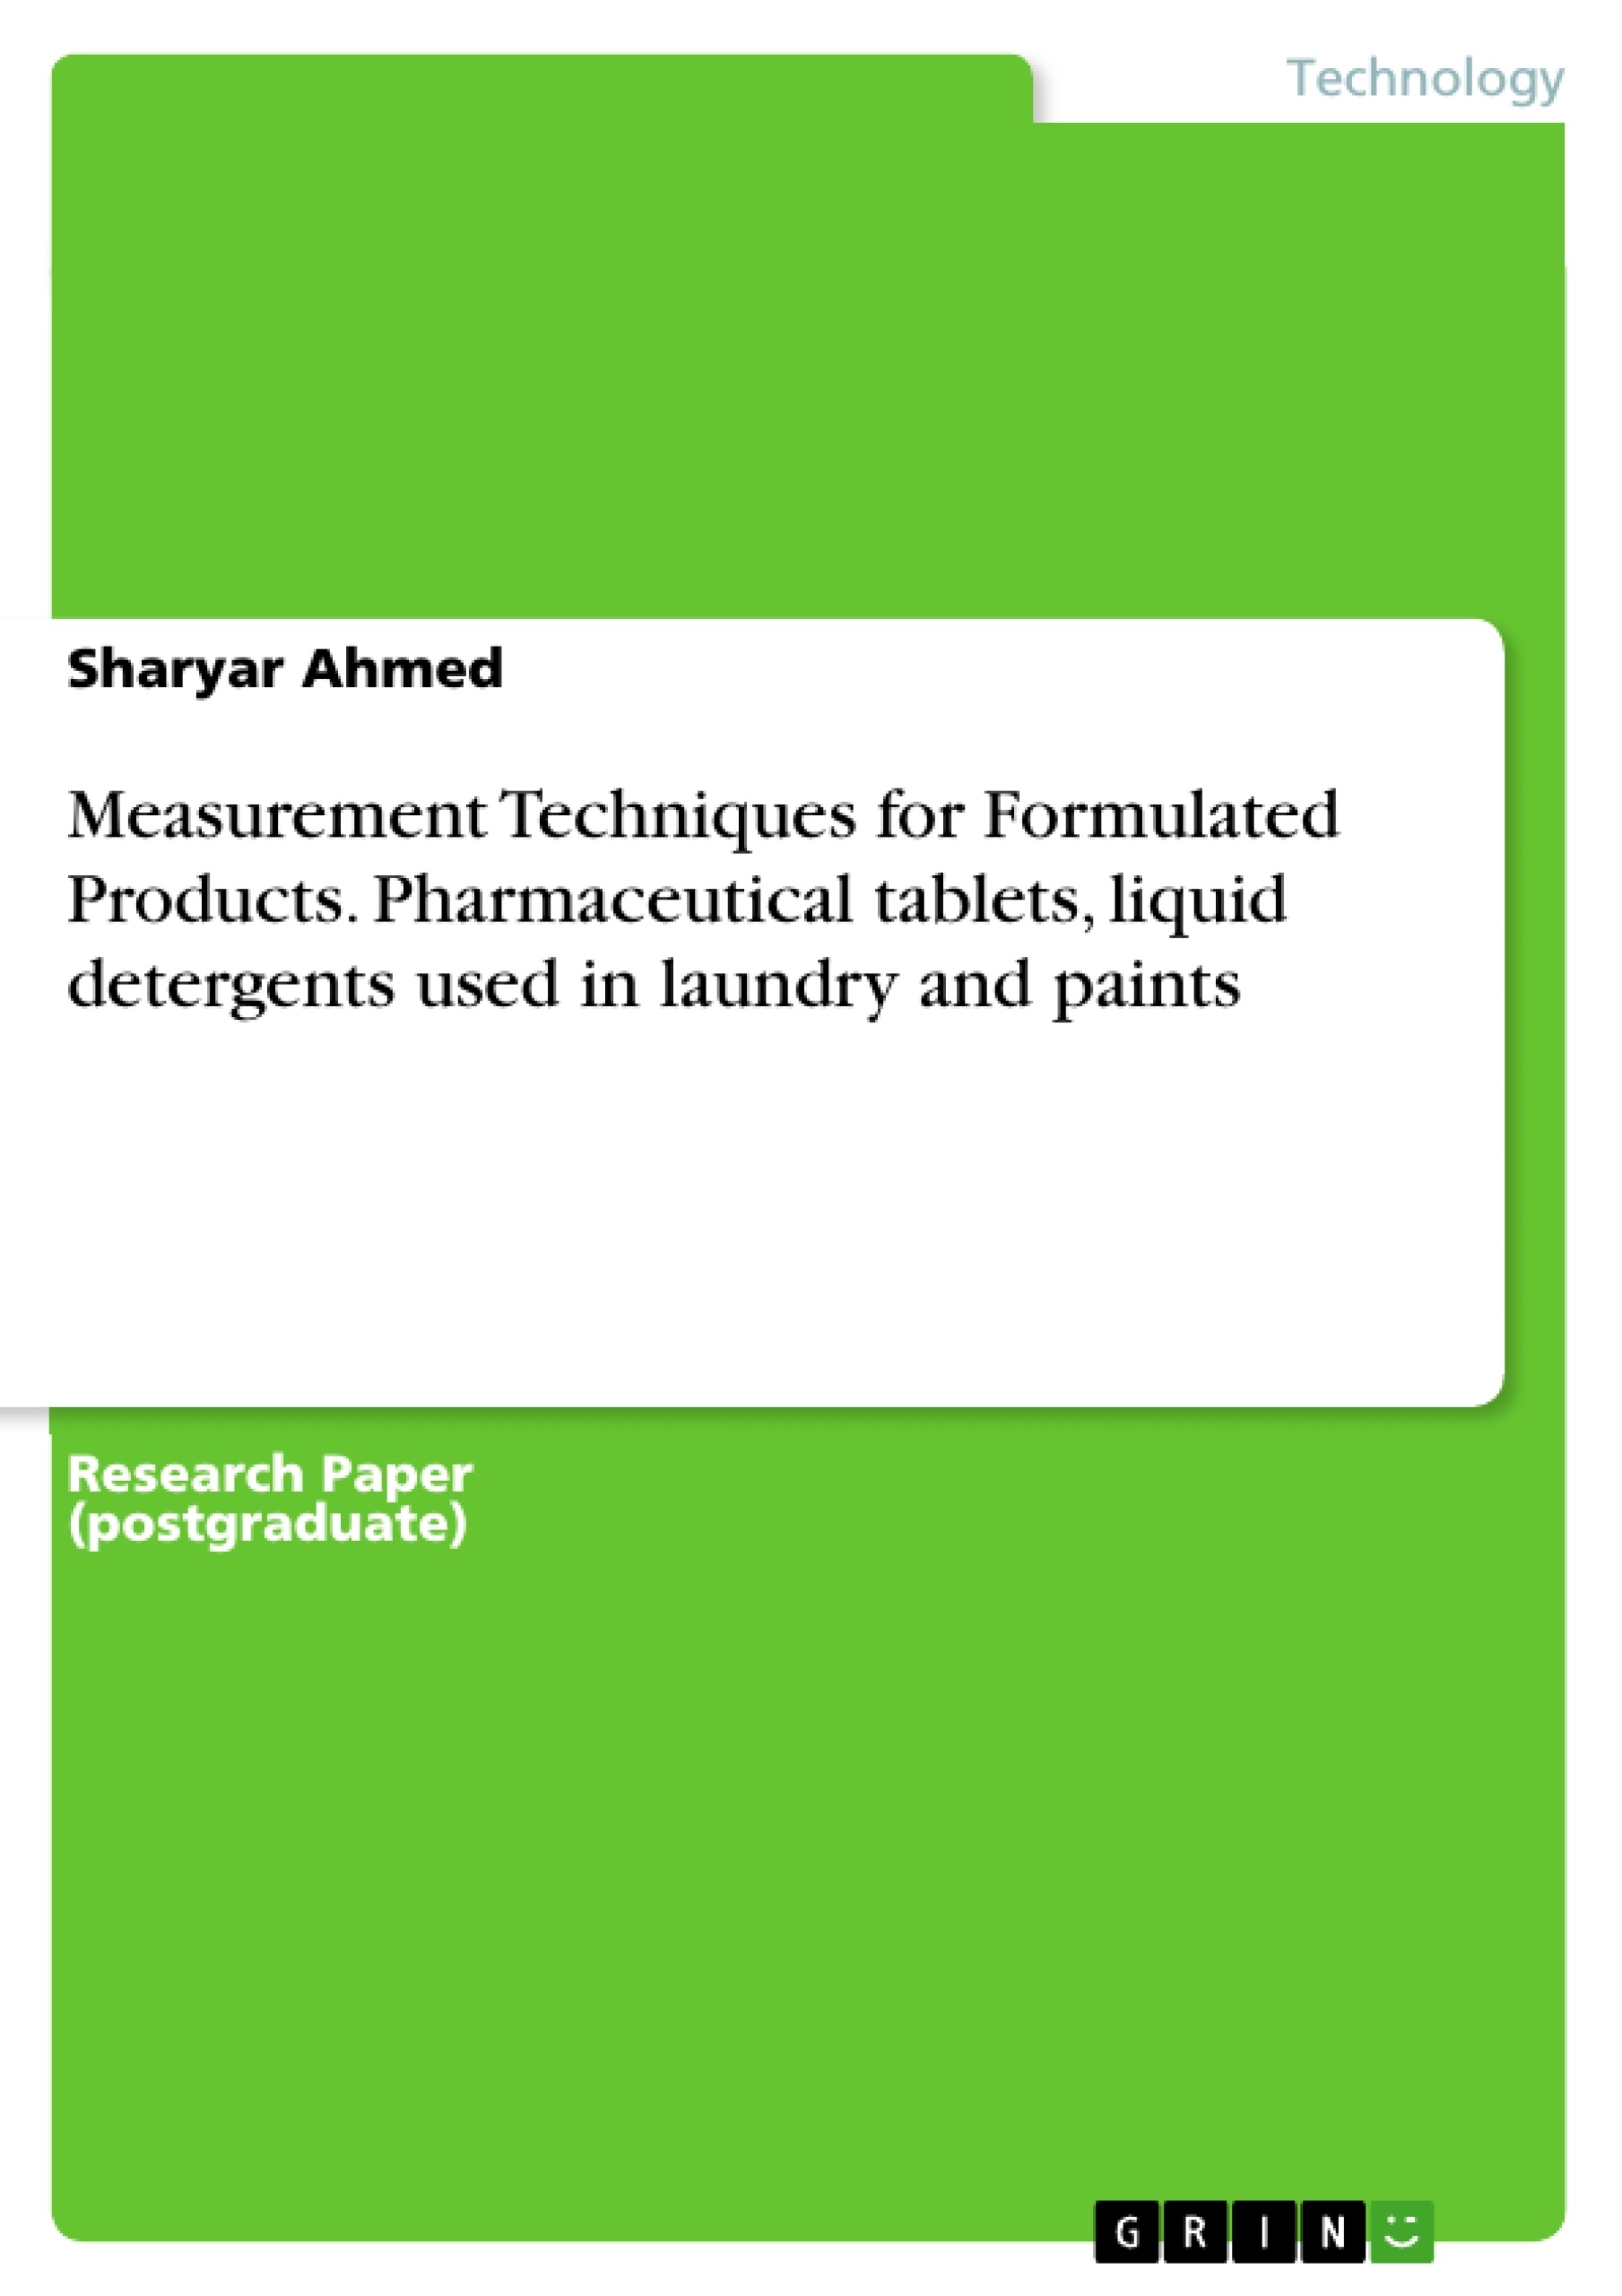 Title: Measurement Techniques for Formulated Products. Pharmaceutical tablets, liquid detergents used in laundry and paints